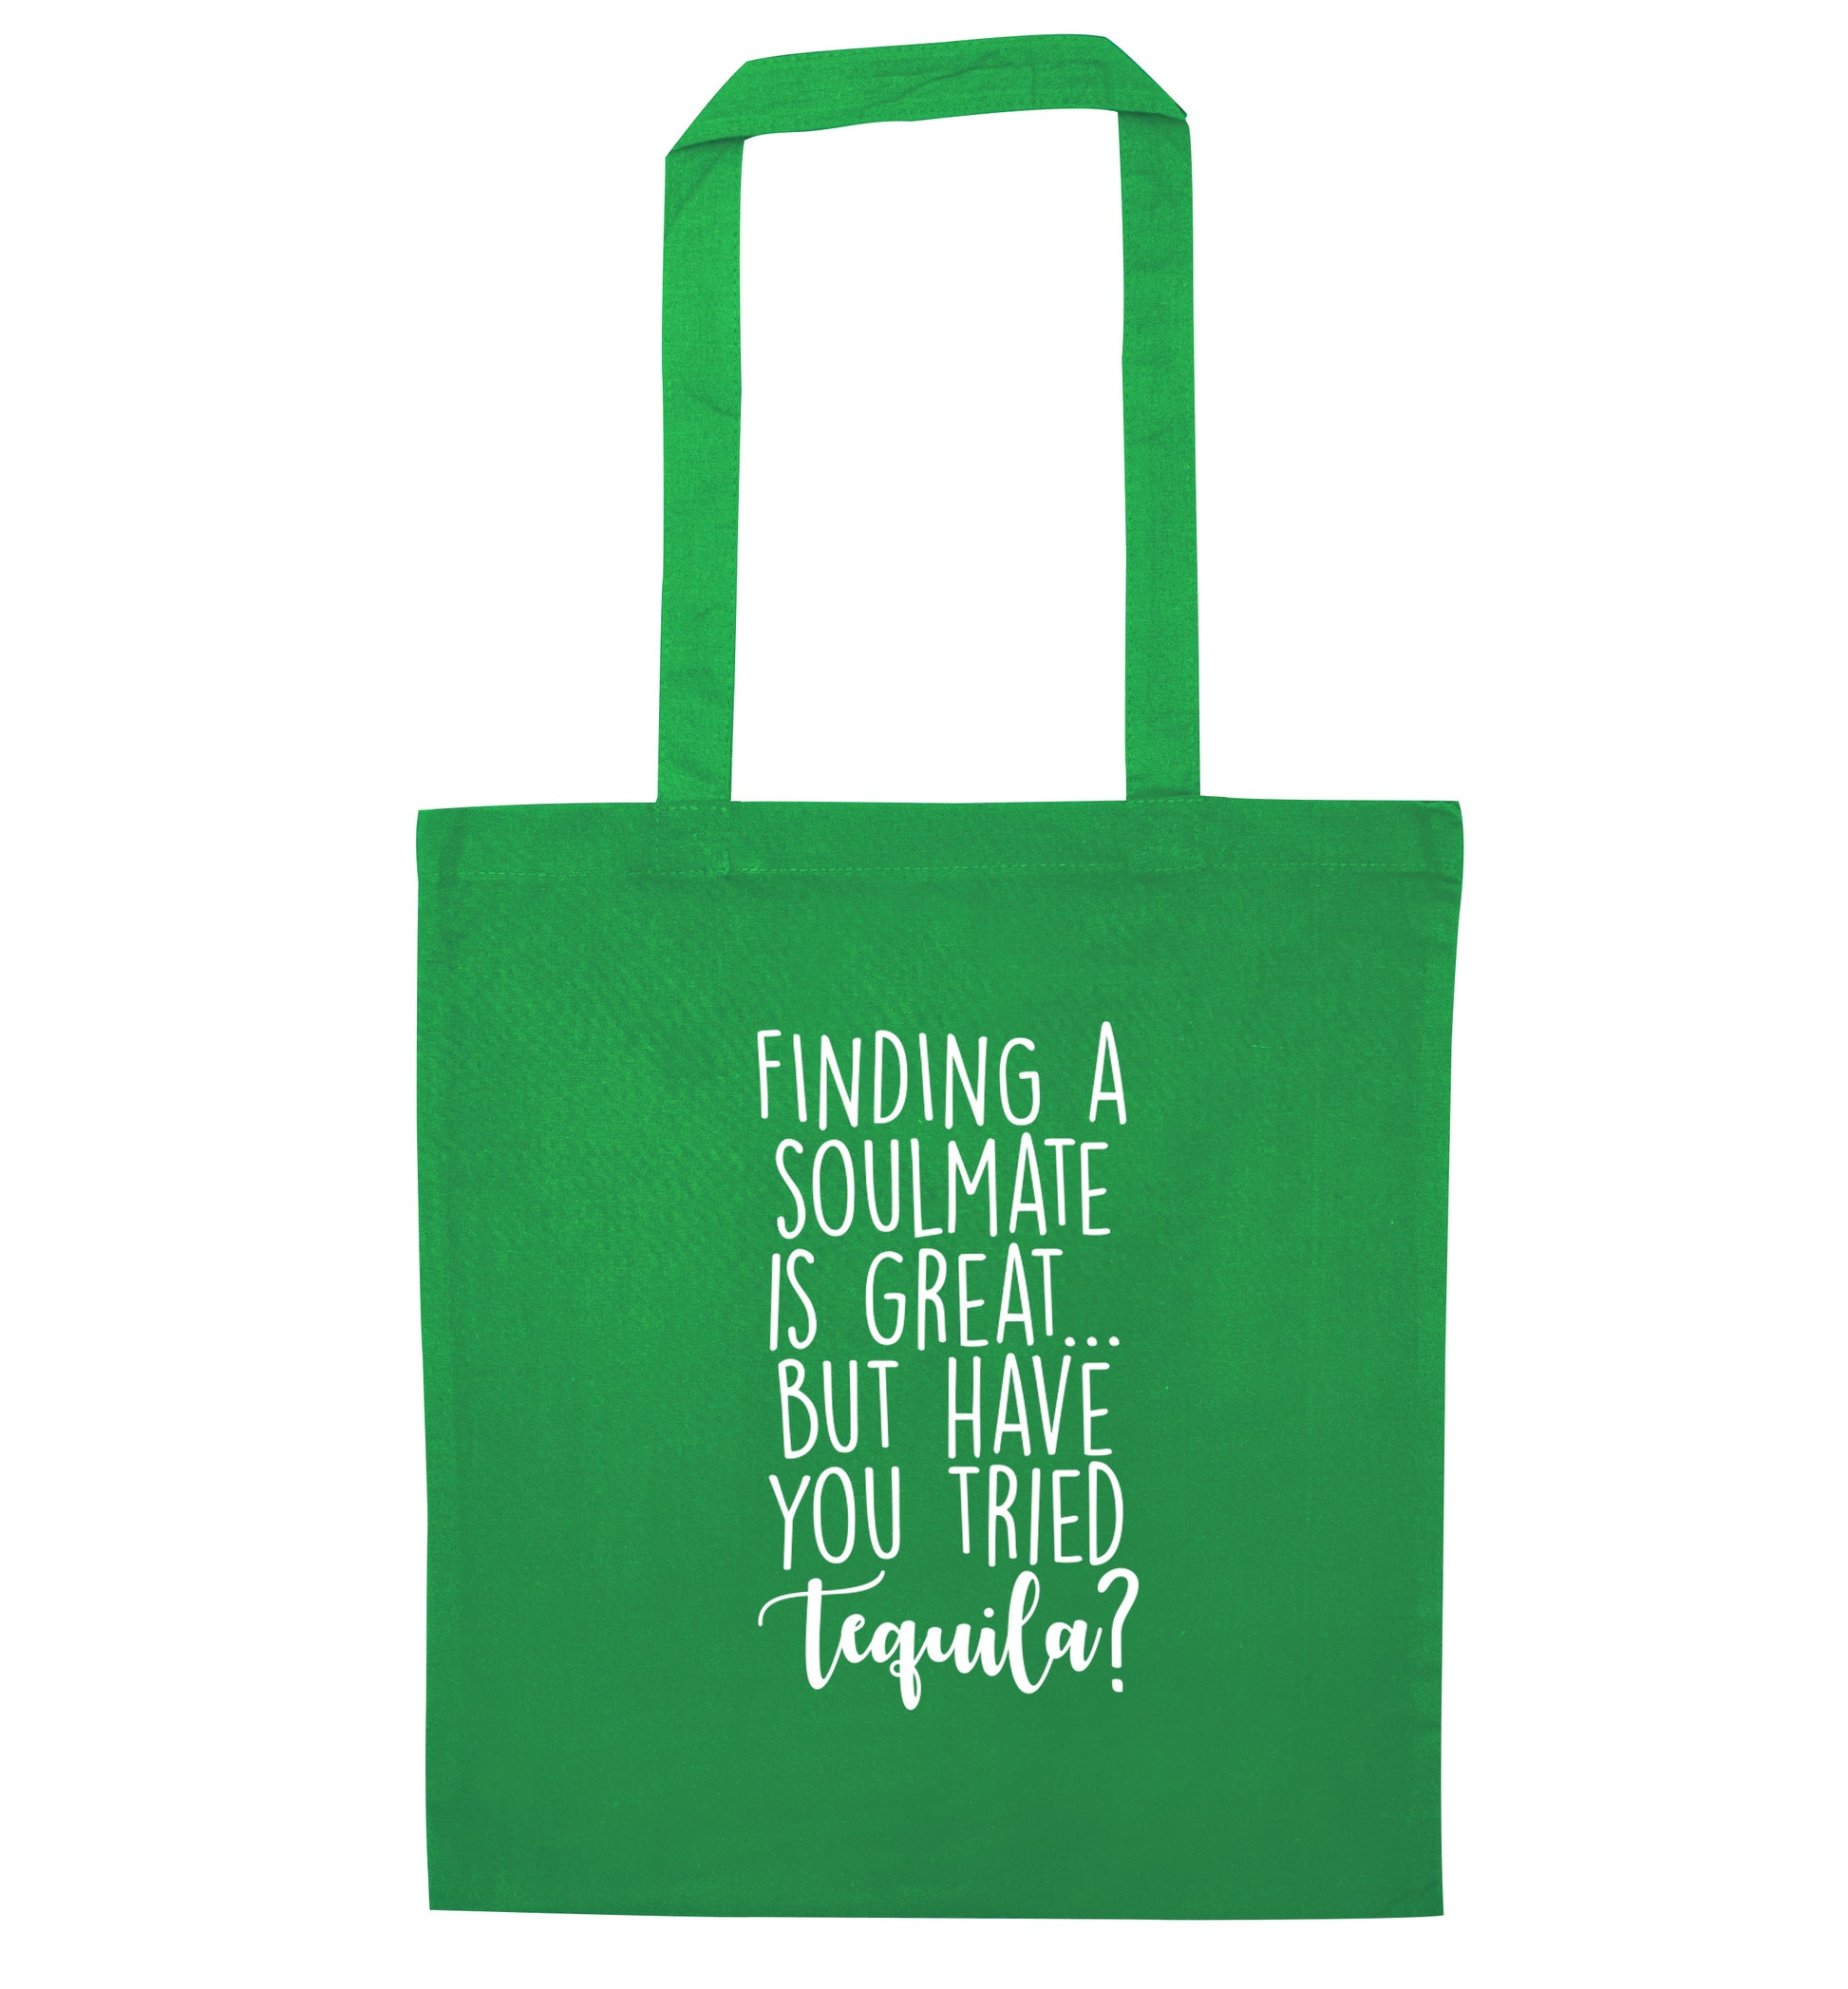 Finding a soulmate is great but have you tried tequila? green tote bag